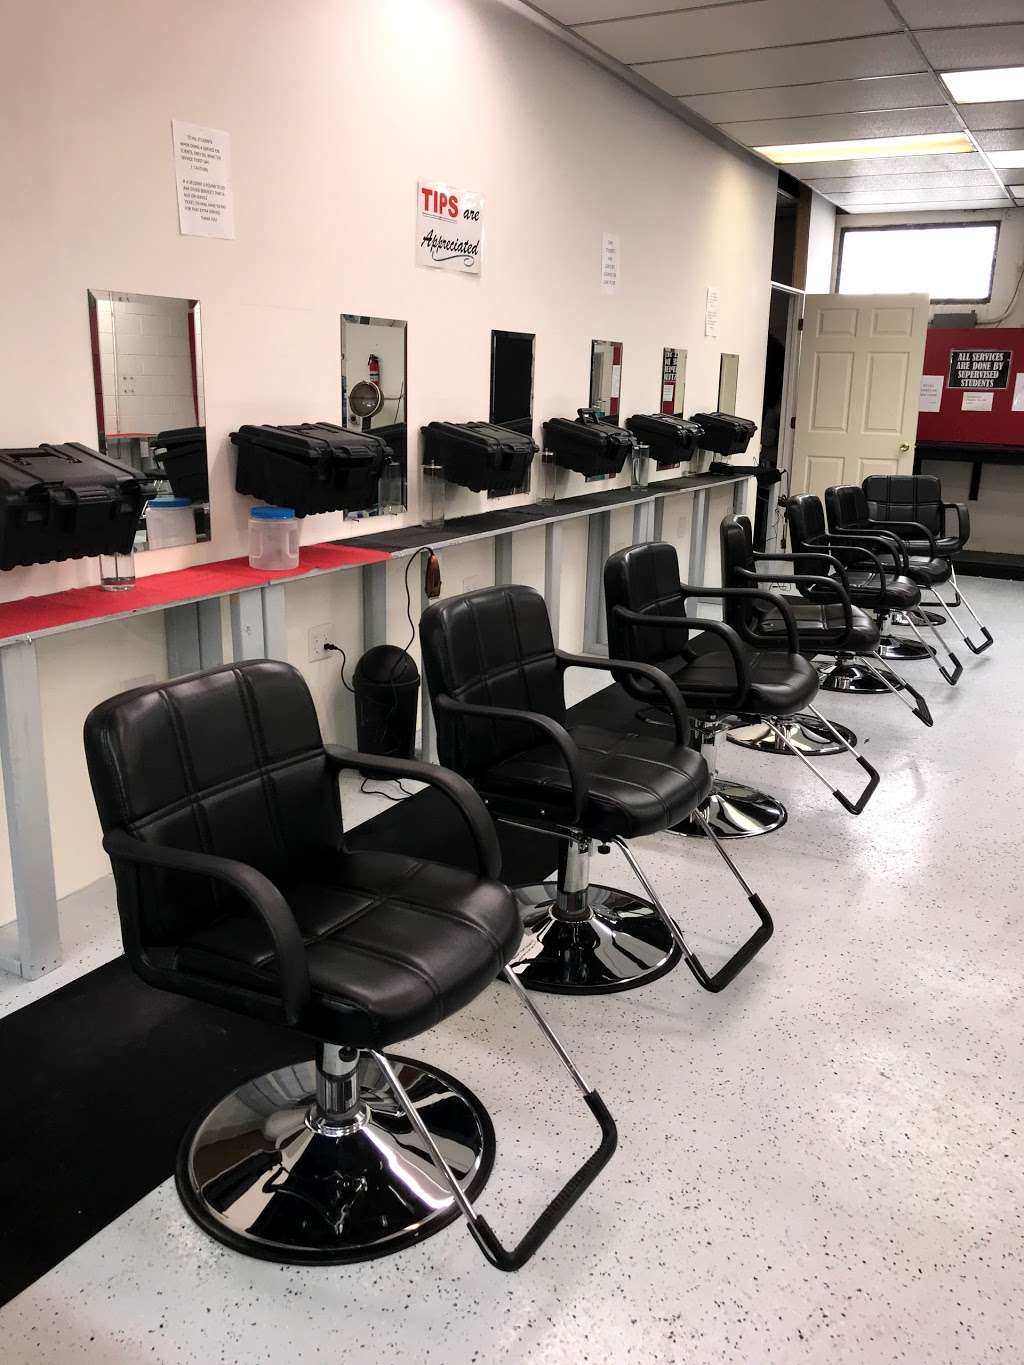 Loricees Beauty & Barber Academy College | 155 E 61st Ave, Merrillville, IN 46410 | Phone: (219) 980-6225